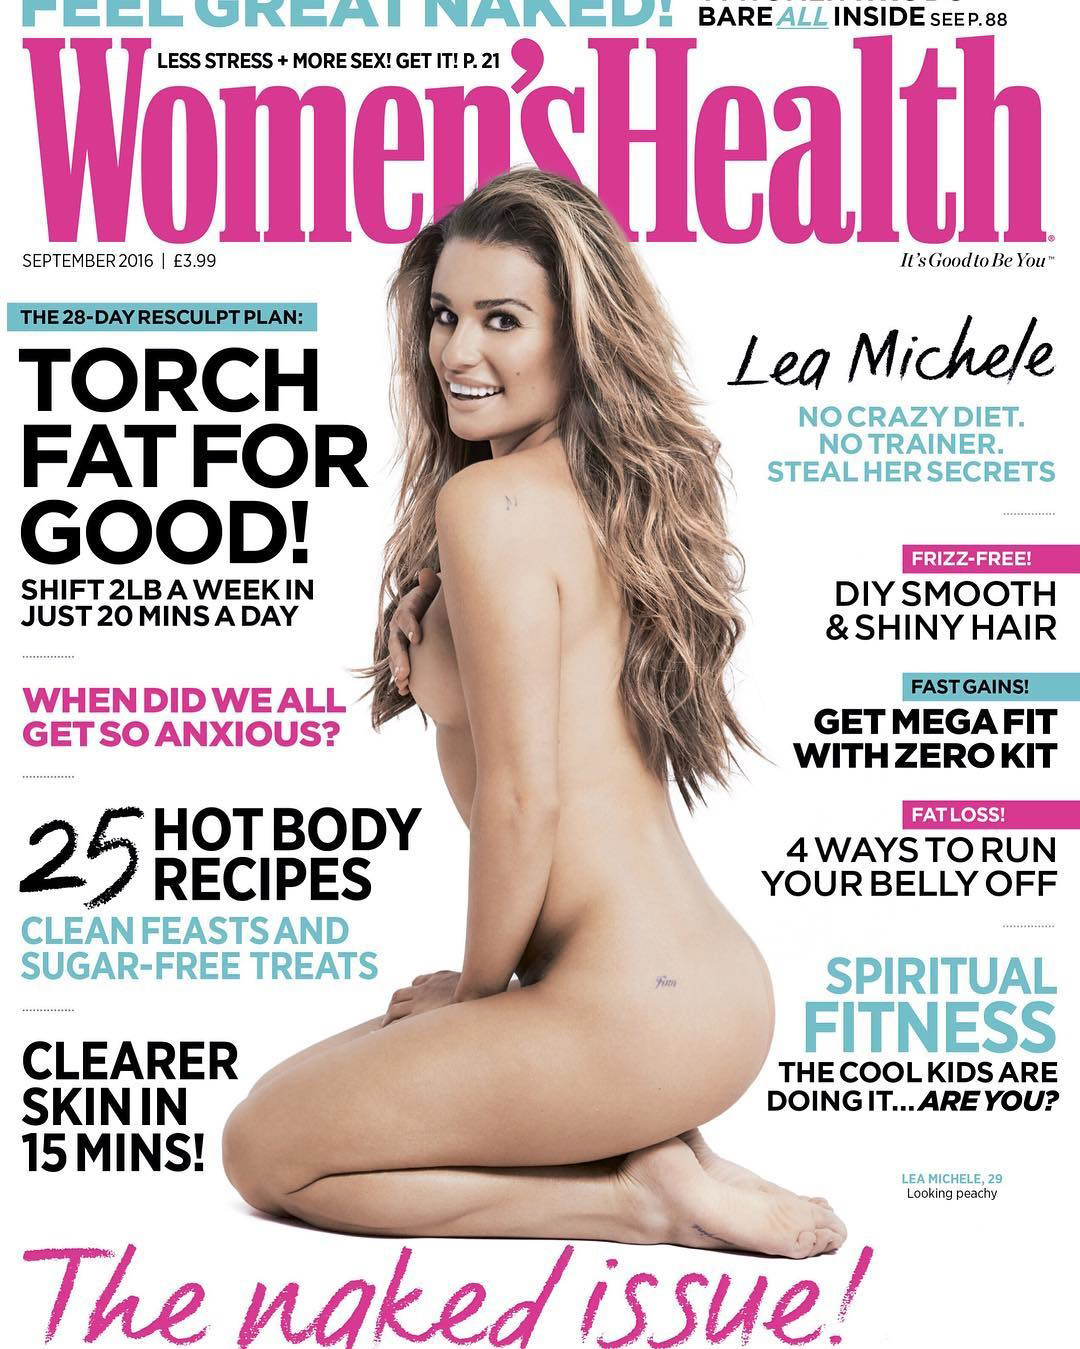 Lea Michele Naked Pics For Women S Health [new 7 Nudes]